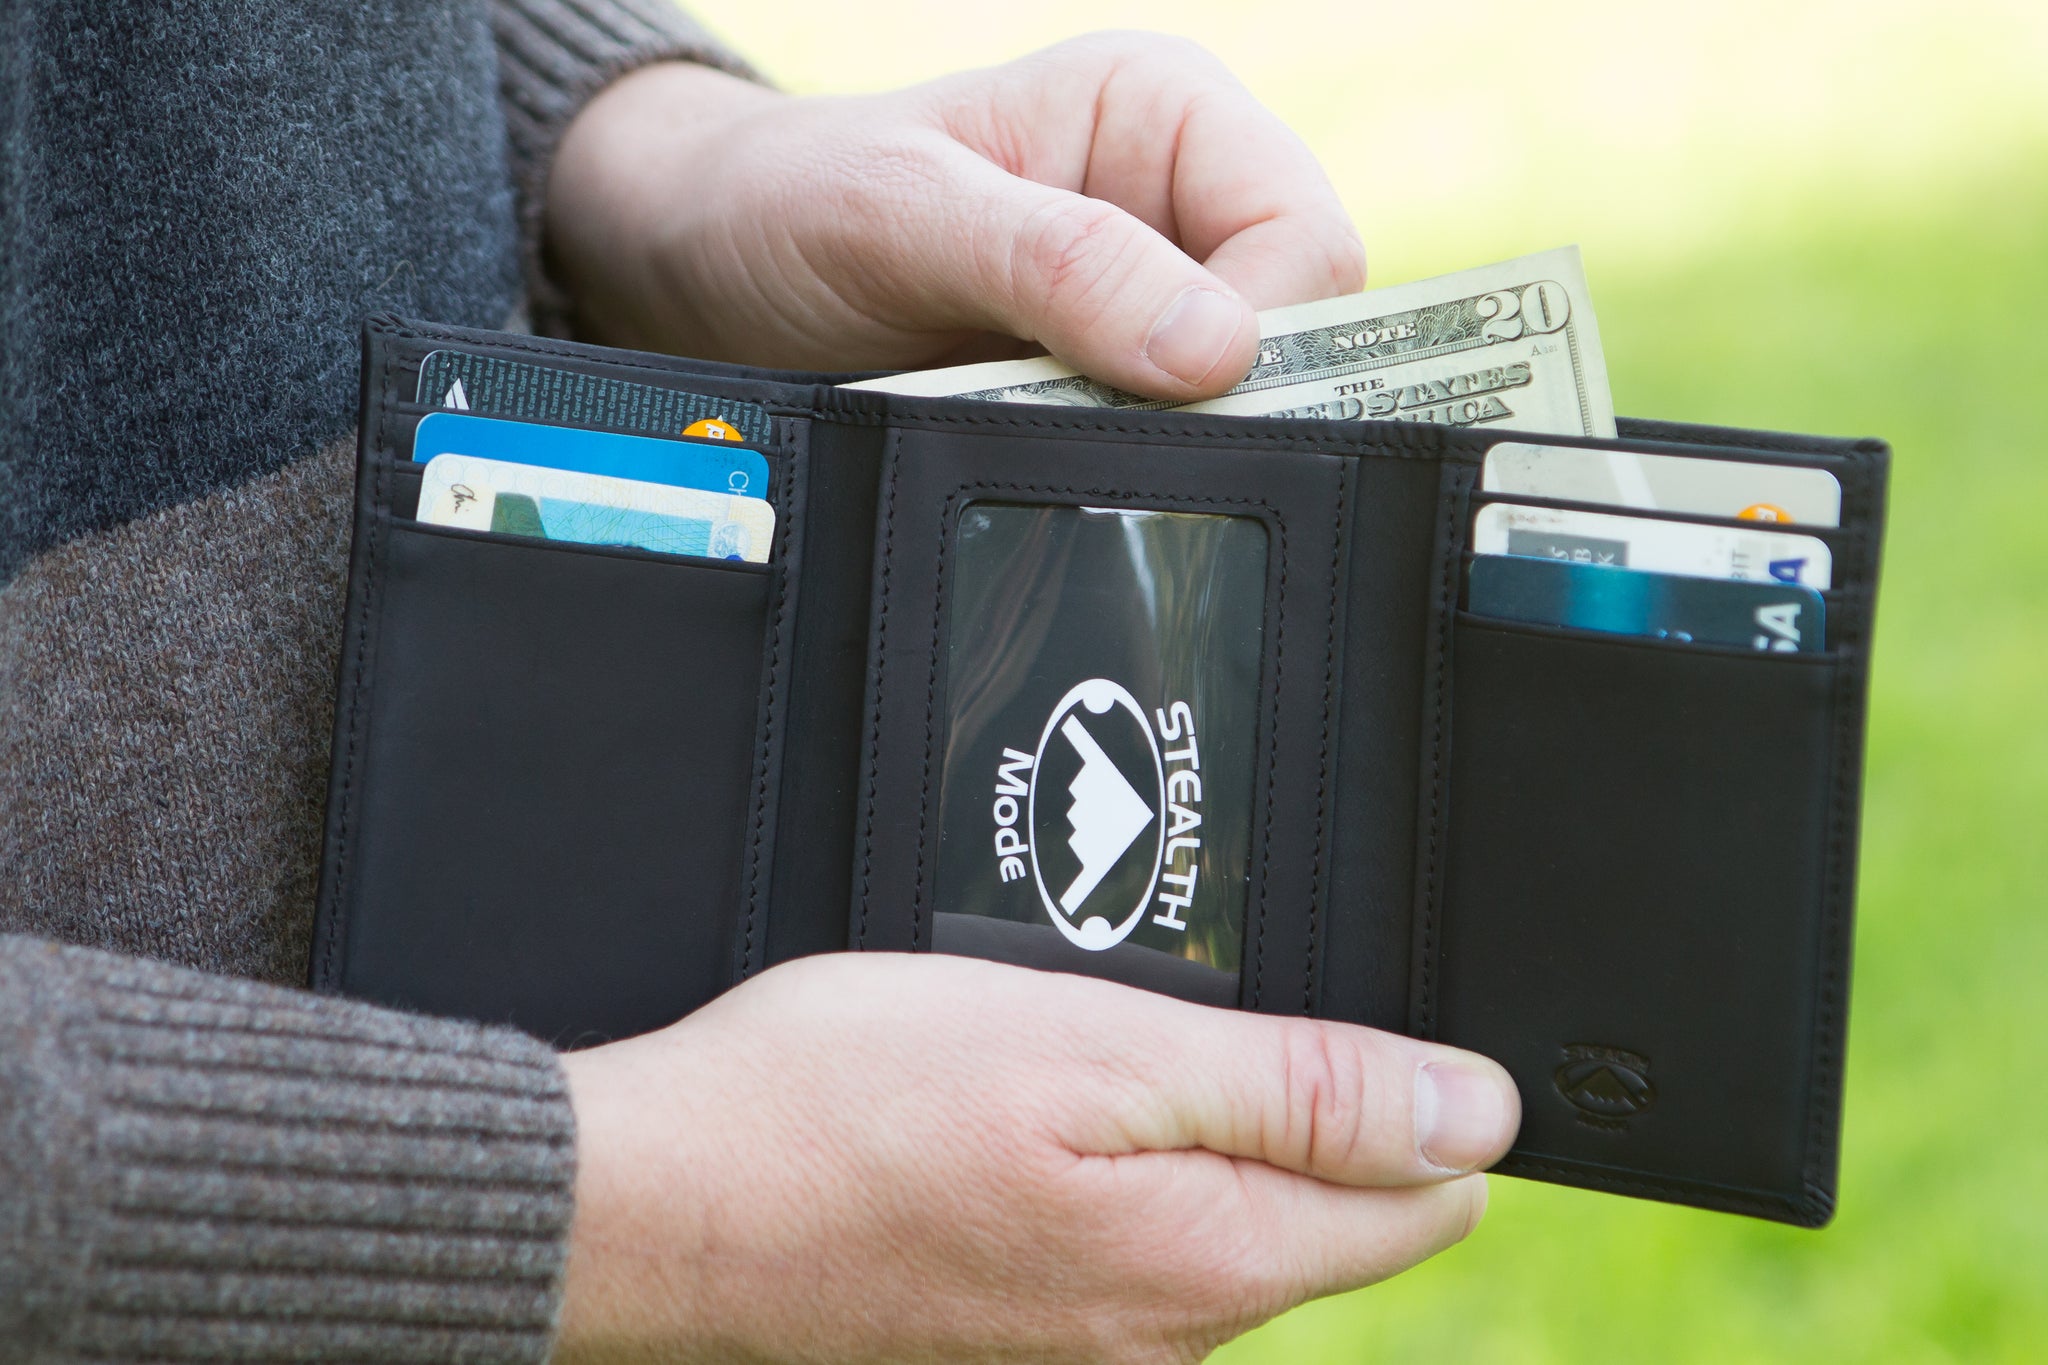 Black Trifold Leather Wallet With RFID Blocking and ID Window